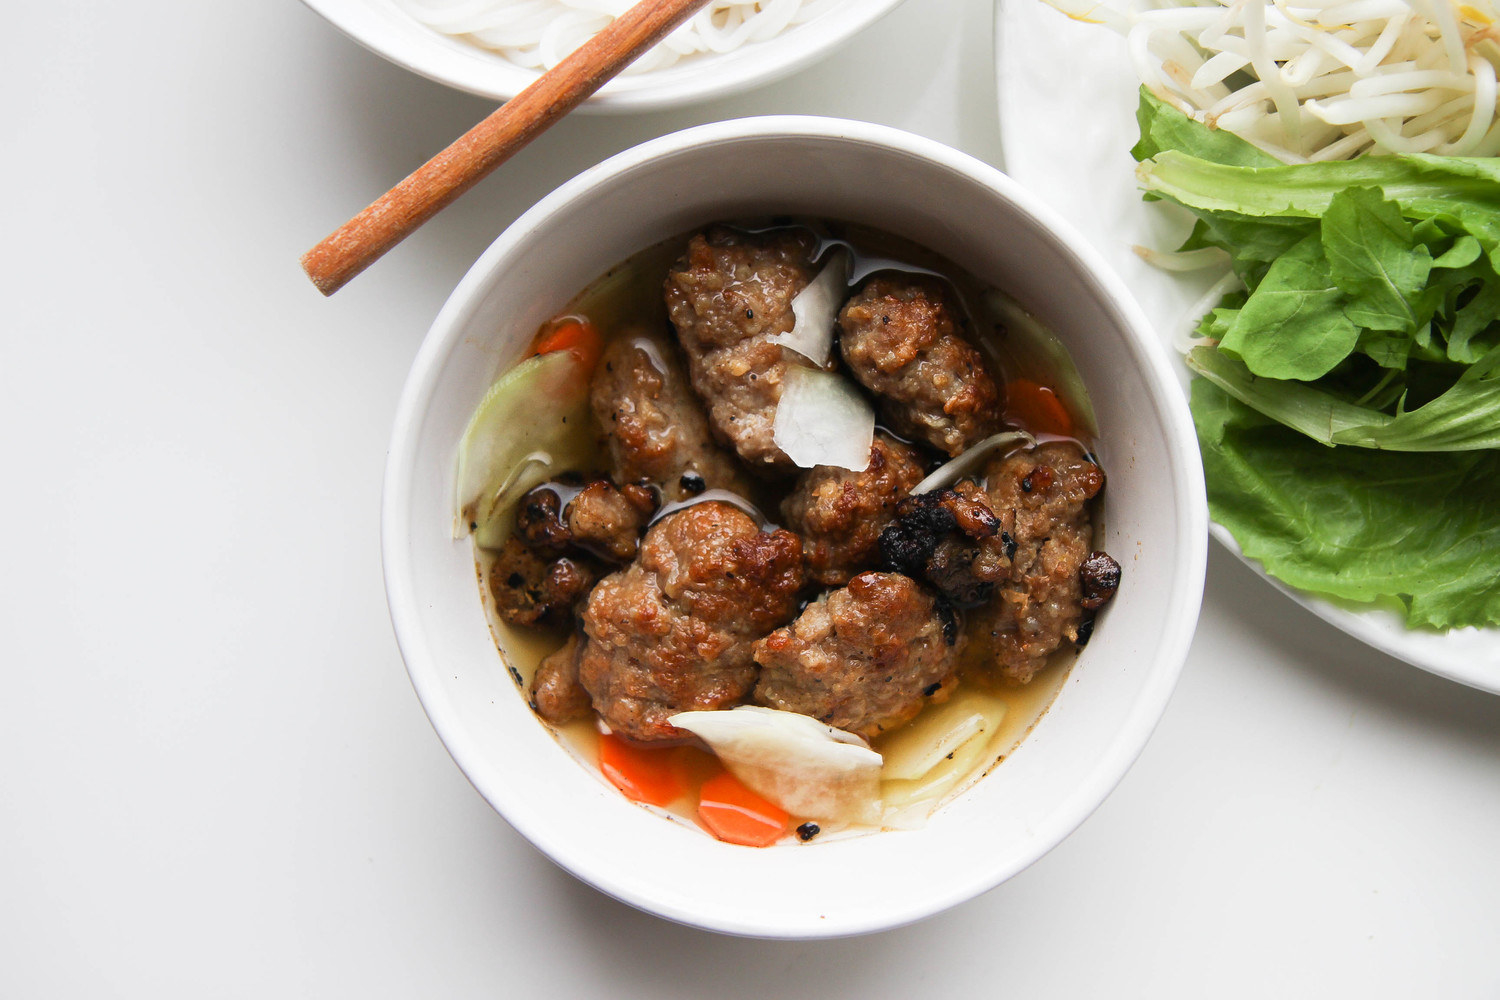 Plain bowl filled with pork patties, broth, and vegetables